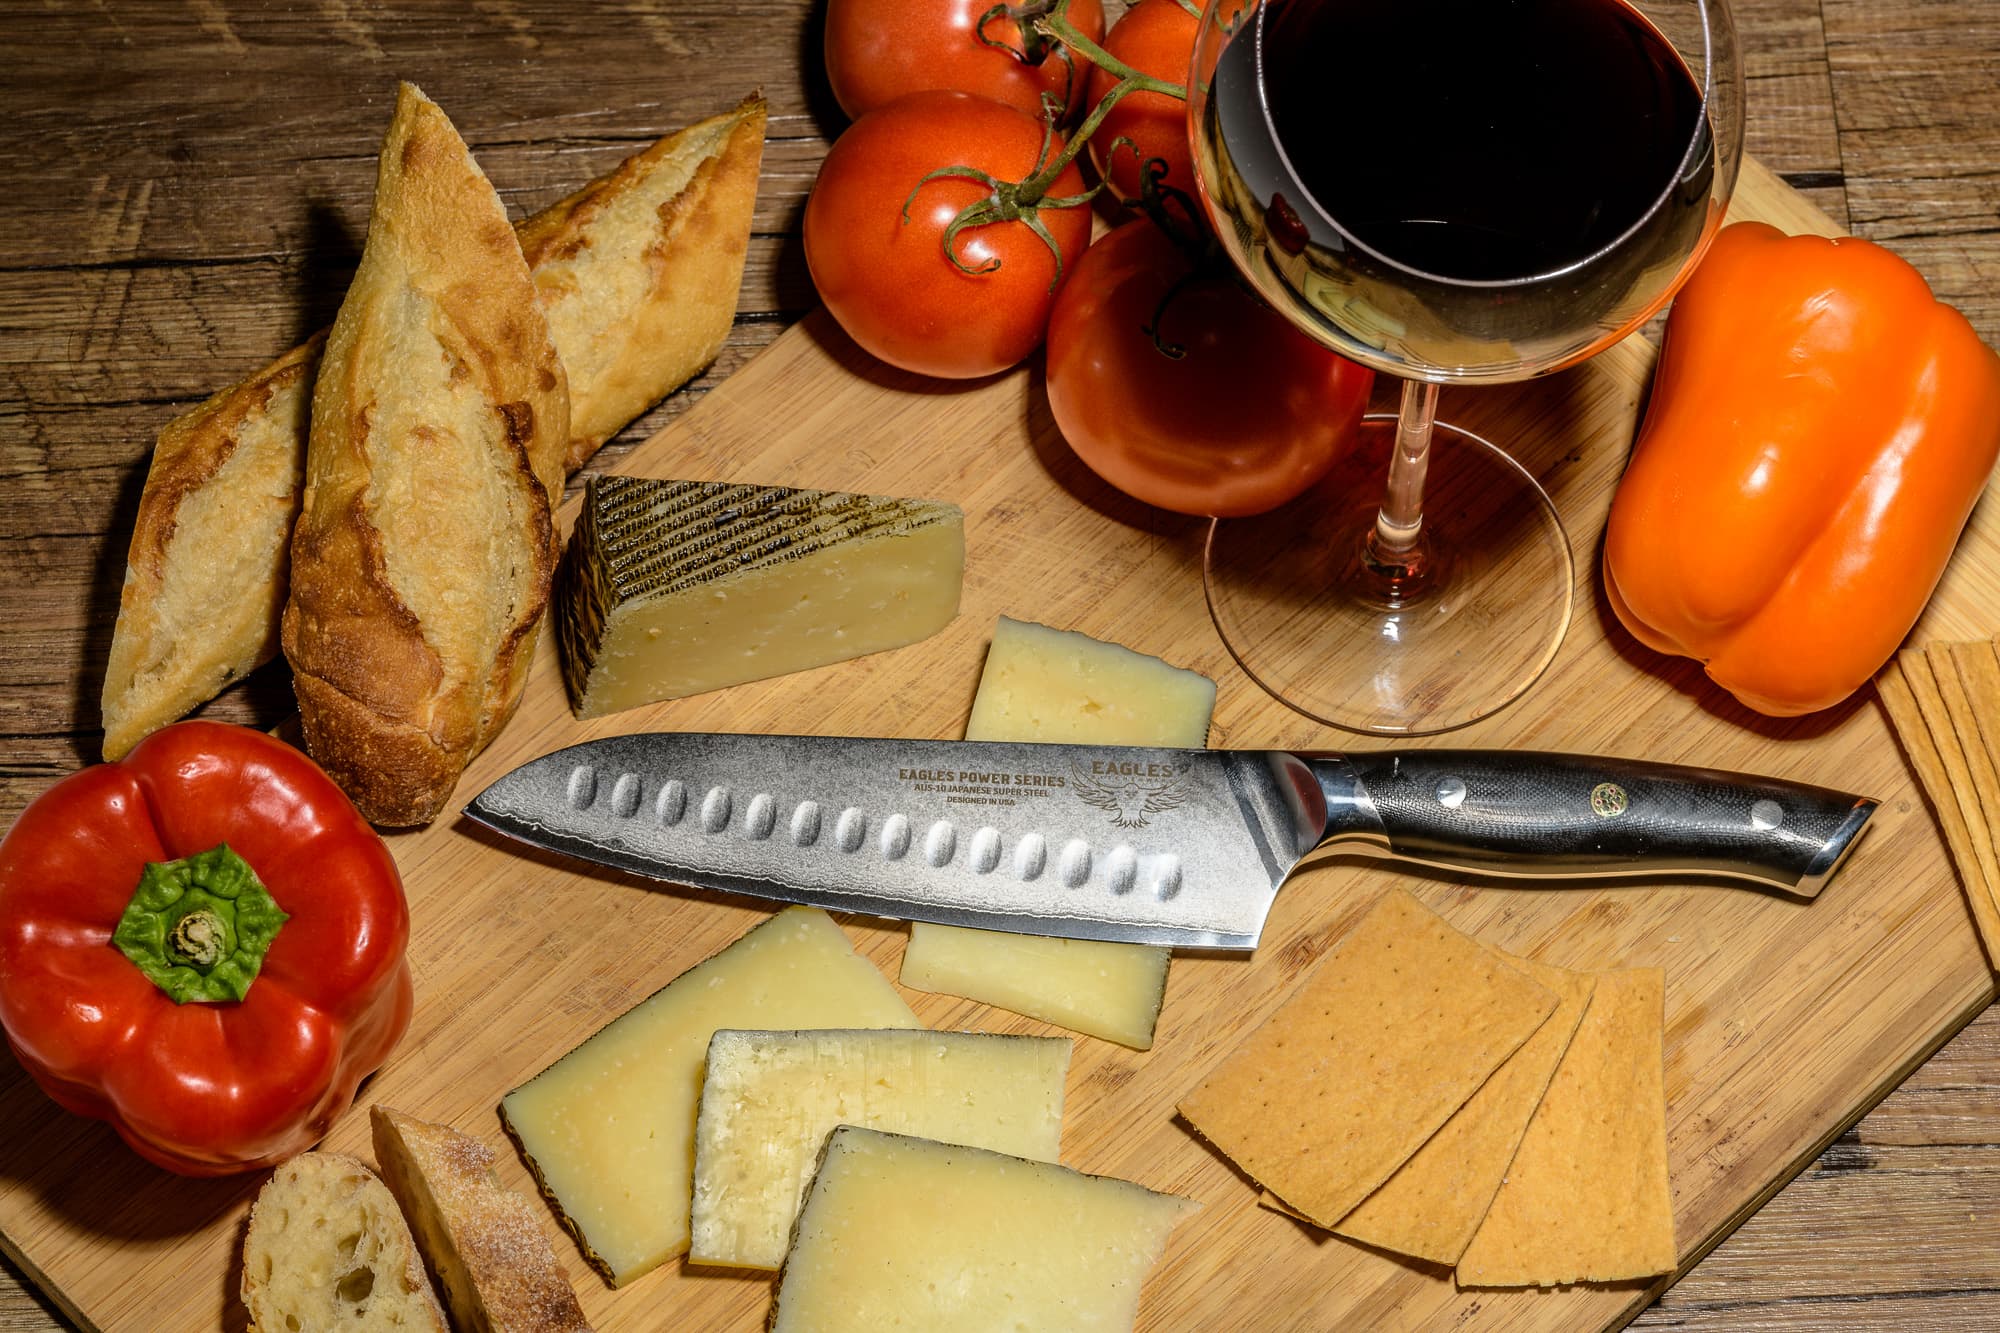 knife-cheese-wine-cutting-lifestyle